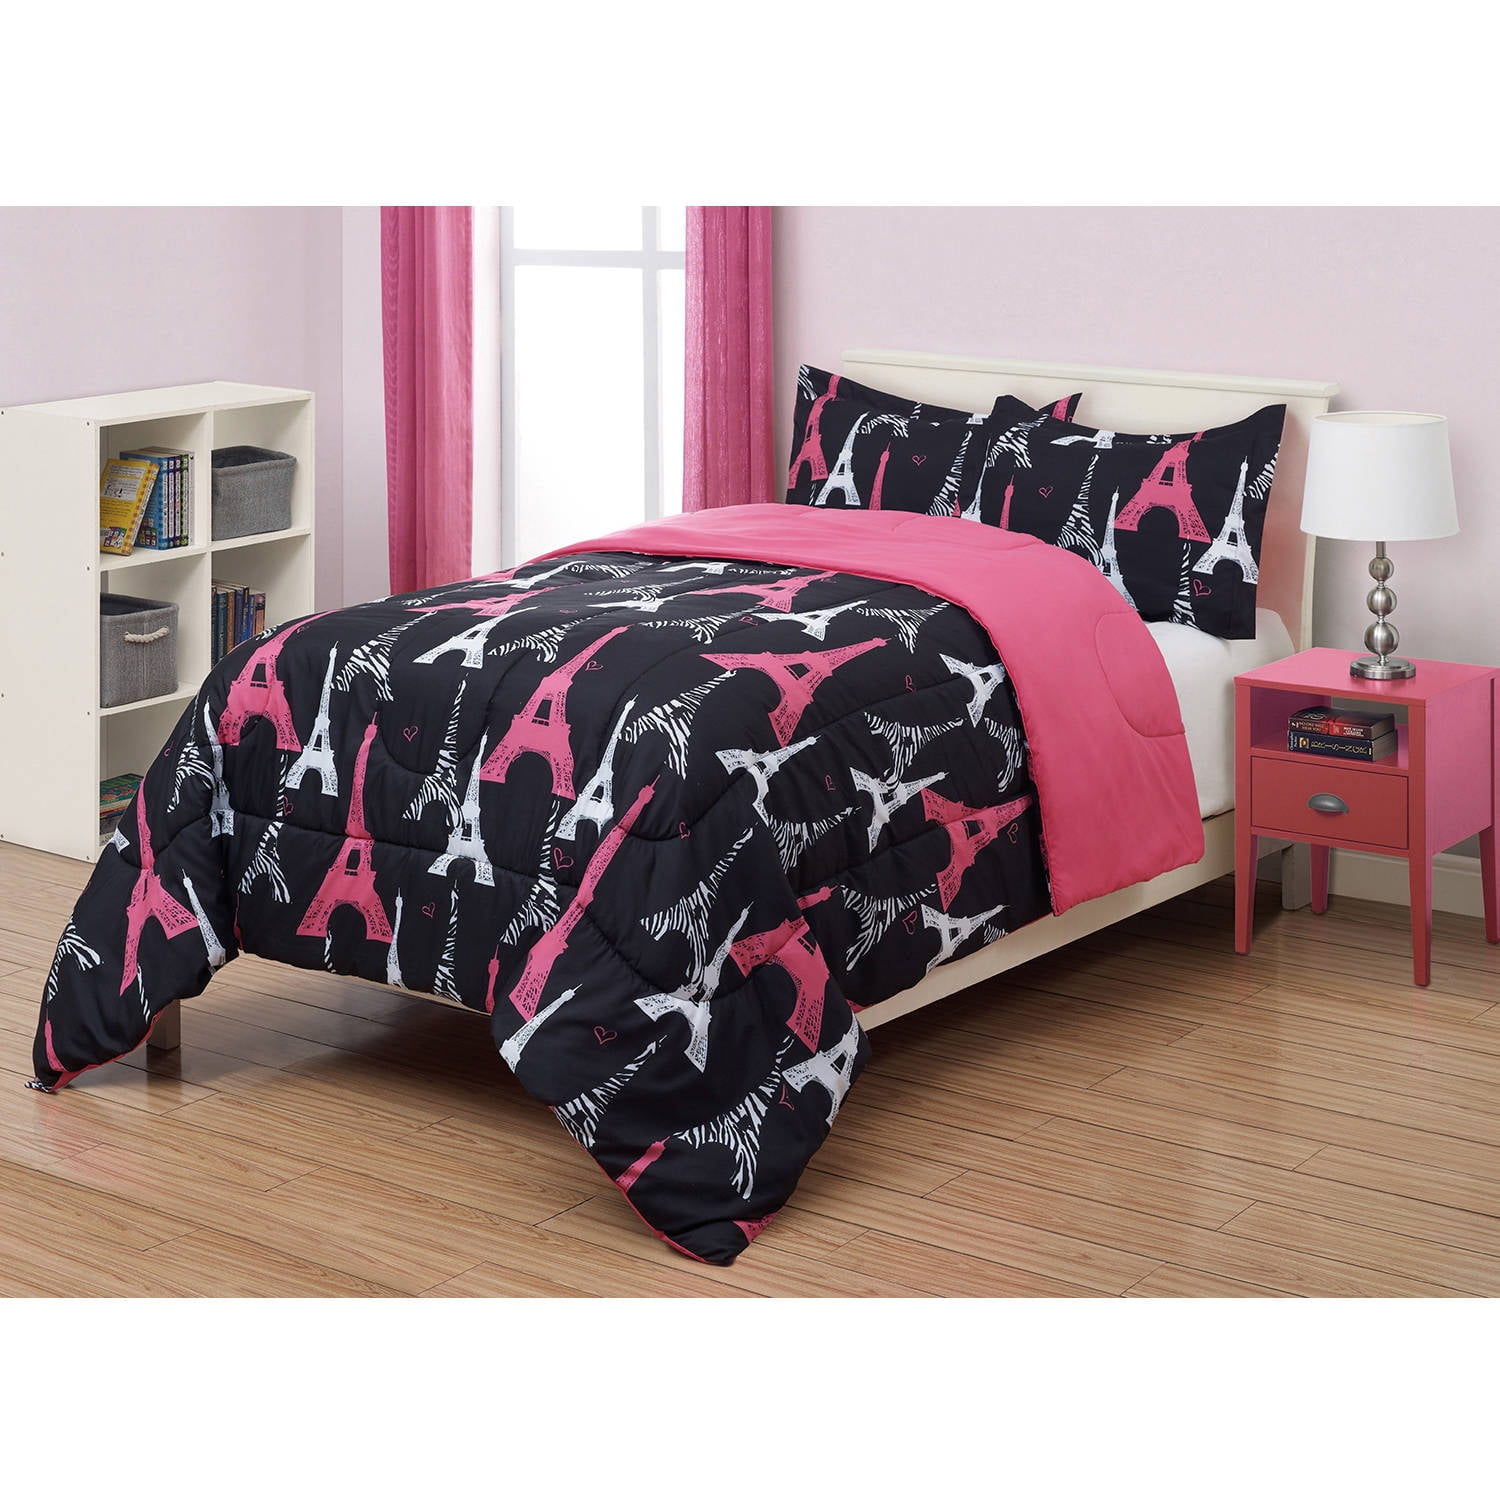 Eiffel Tower Themed Girls Boys Bedding Full/Queen Size Bedspread/Coverlet Set 3 PCS Pink With Love From Paris Bedding